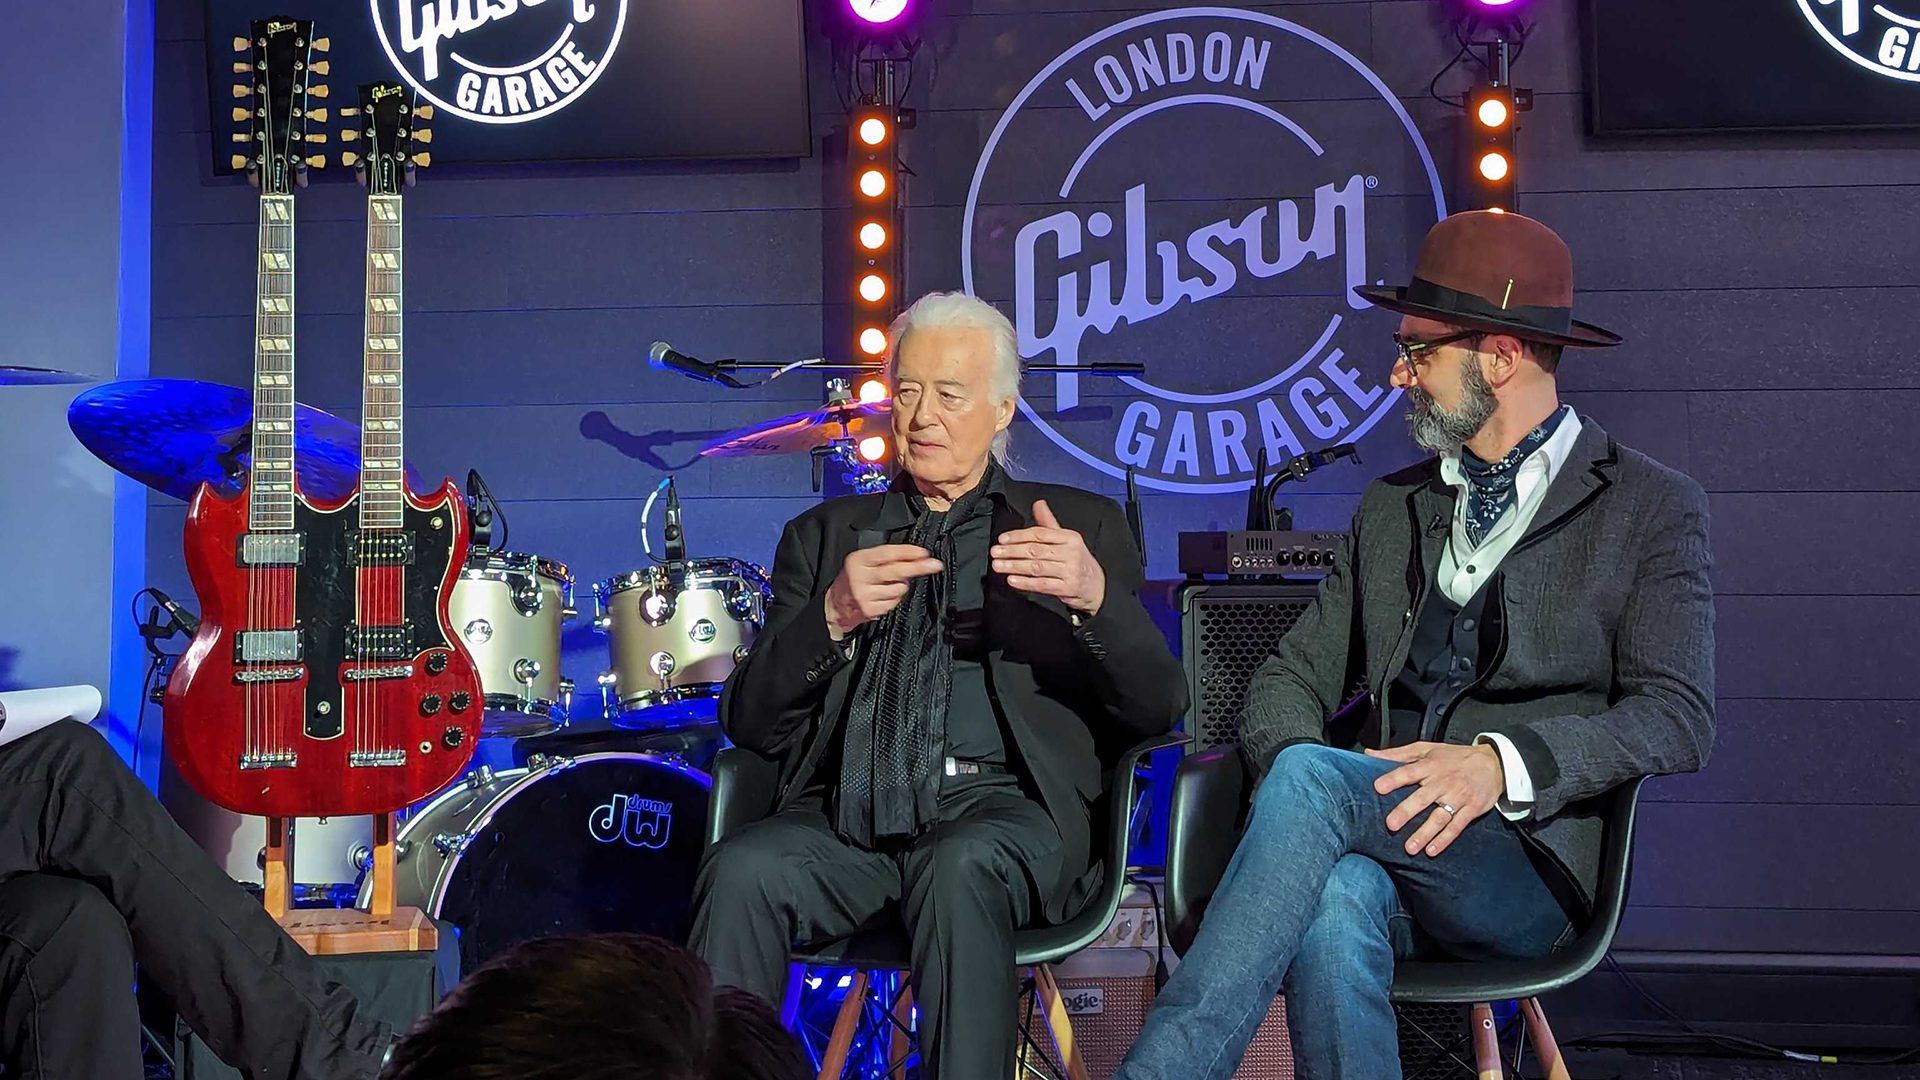 “We walked into your house, you had the case on the floor and you handed it to me – and then said, ‘No Stairway to Heaven!’” Gibson announces new multi-guitar series with Jimmy Page, kicking off with the signature 1971 EDS-1275 double neck